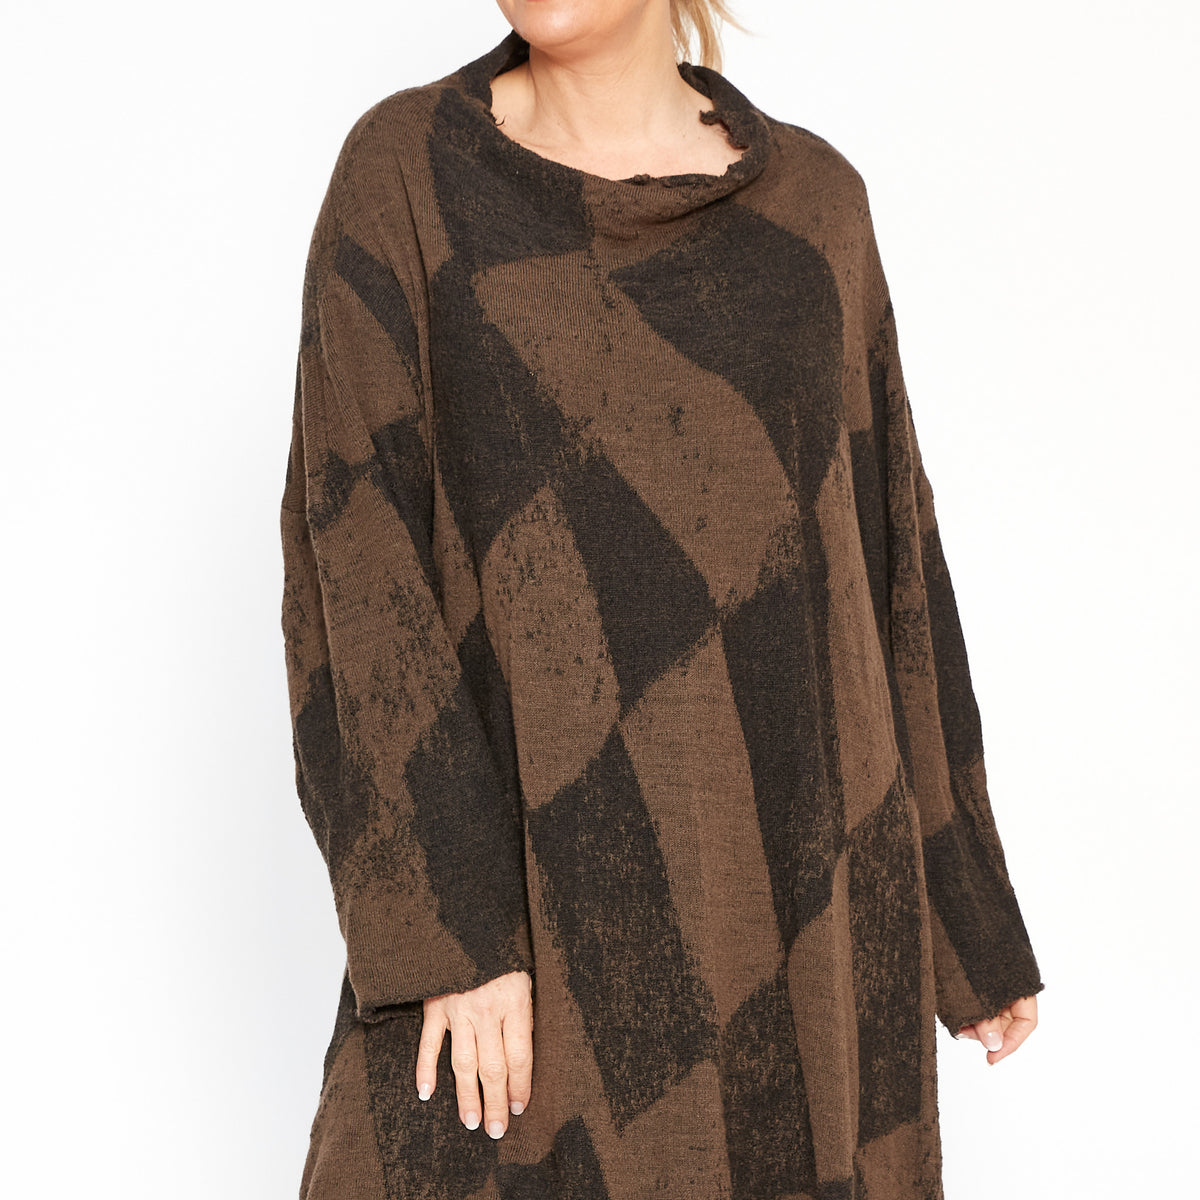 RMW-1687008 Knitted Tunic in Kaffee Check